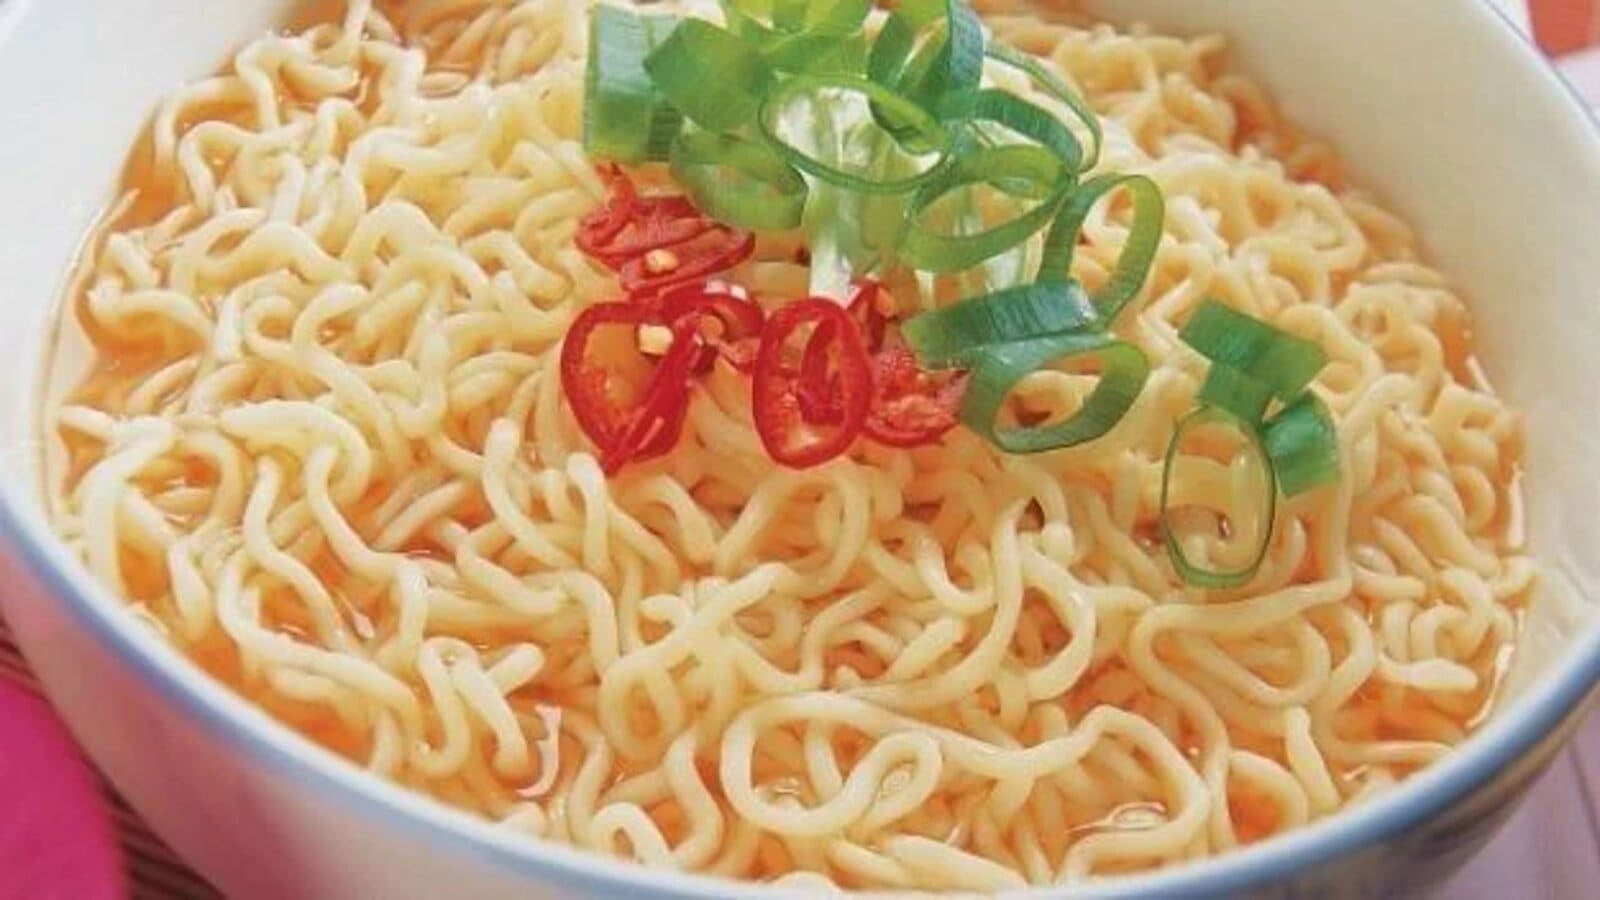 Unilever boosts Ramen Noodles production with US$20.8M Investment in Poznań factory